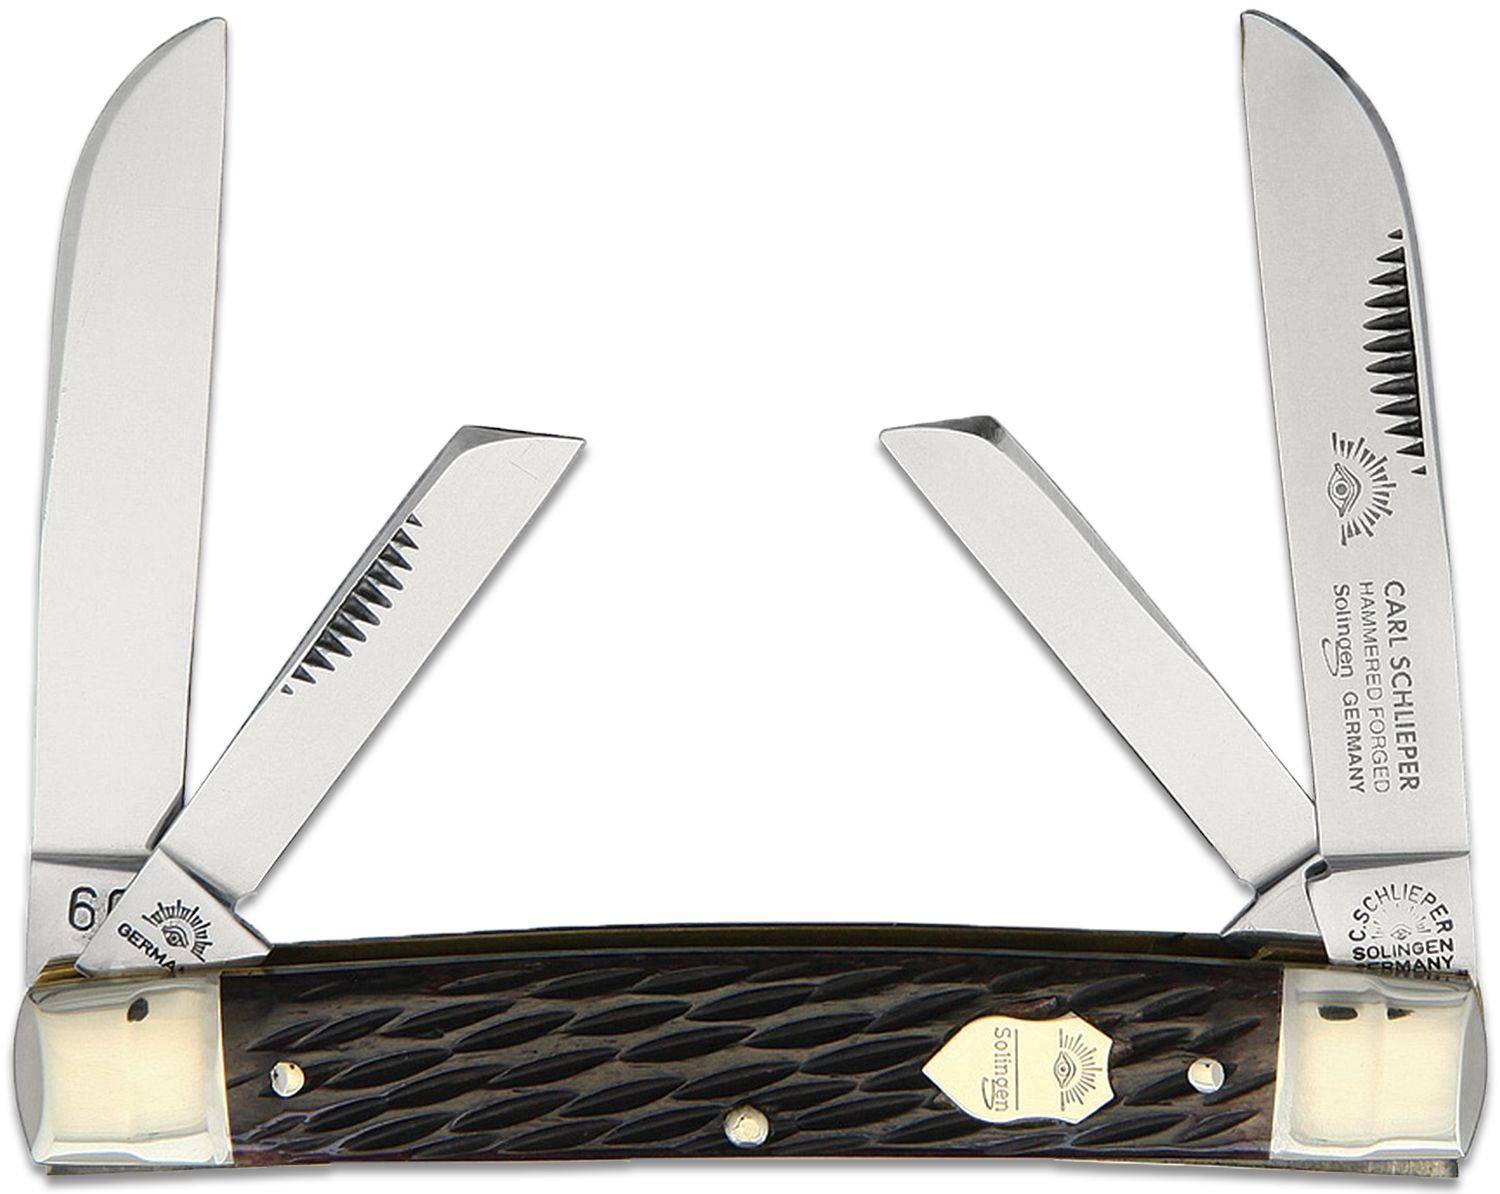 Eye Brand Knives: Eye Brand Congress Knife, Stag Handle, EB-56DS